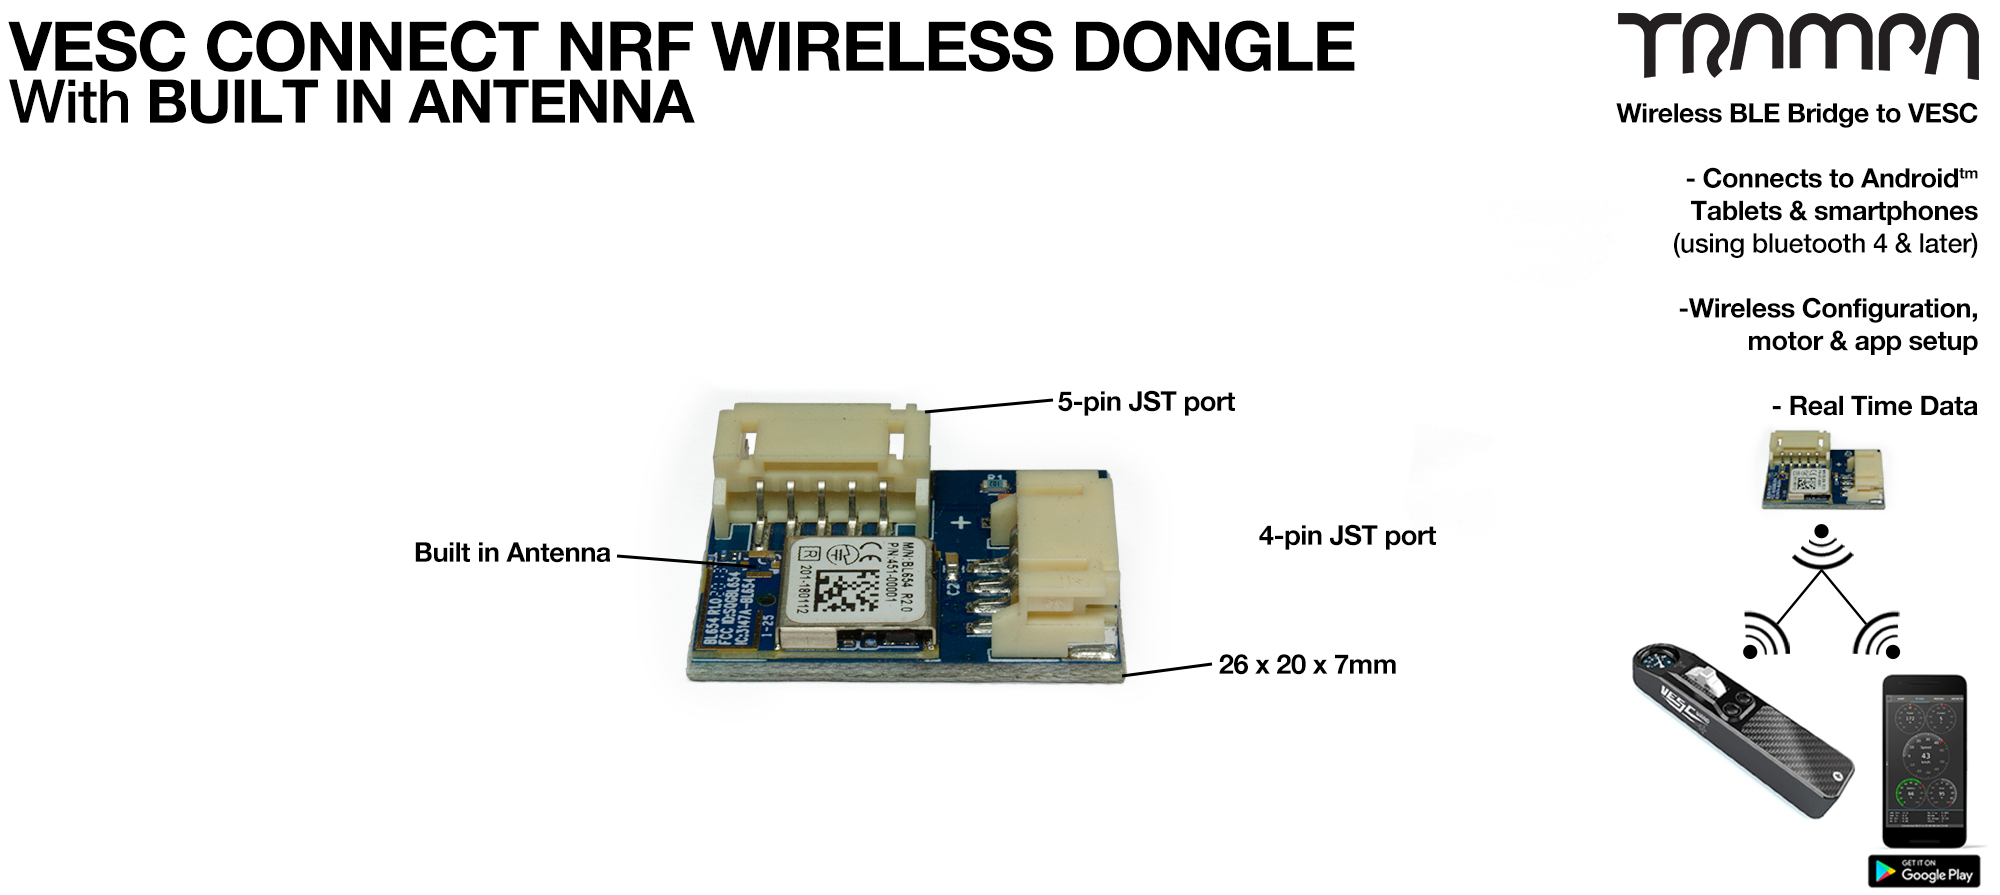 VESC Connect NRF Wireless Dongle with INTEGRATED Antenna 